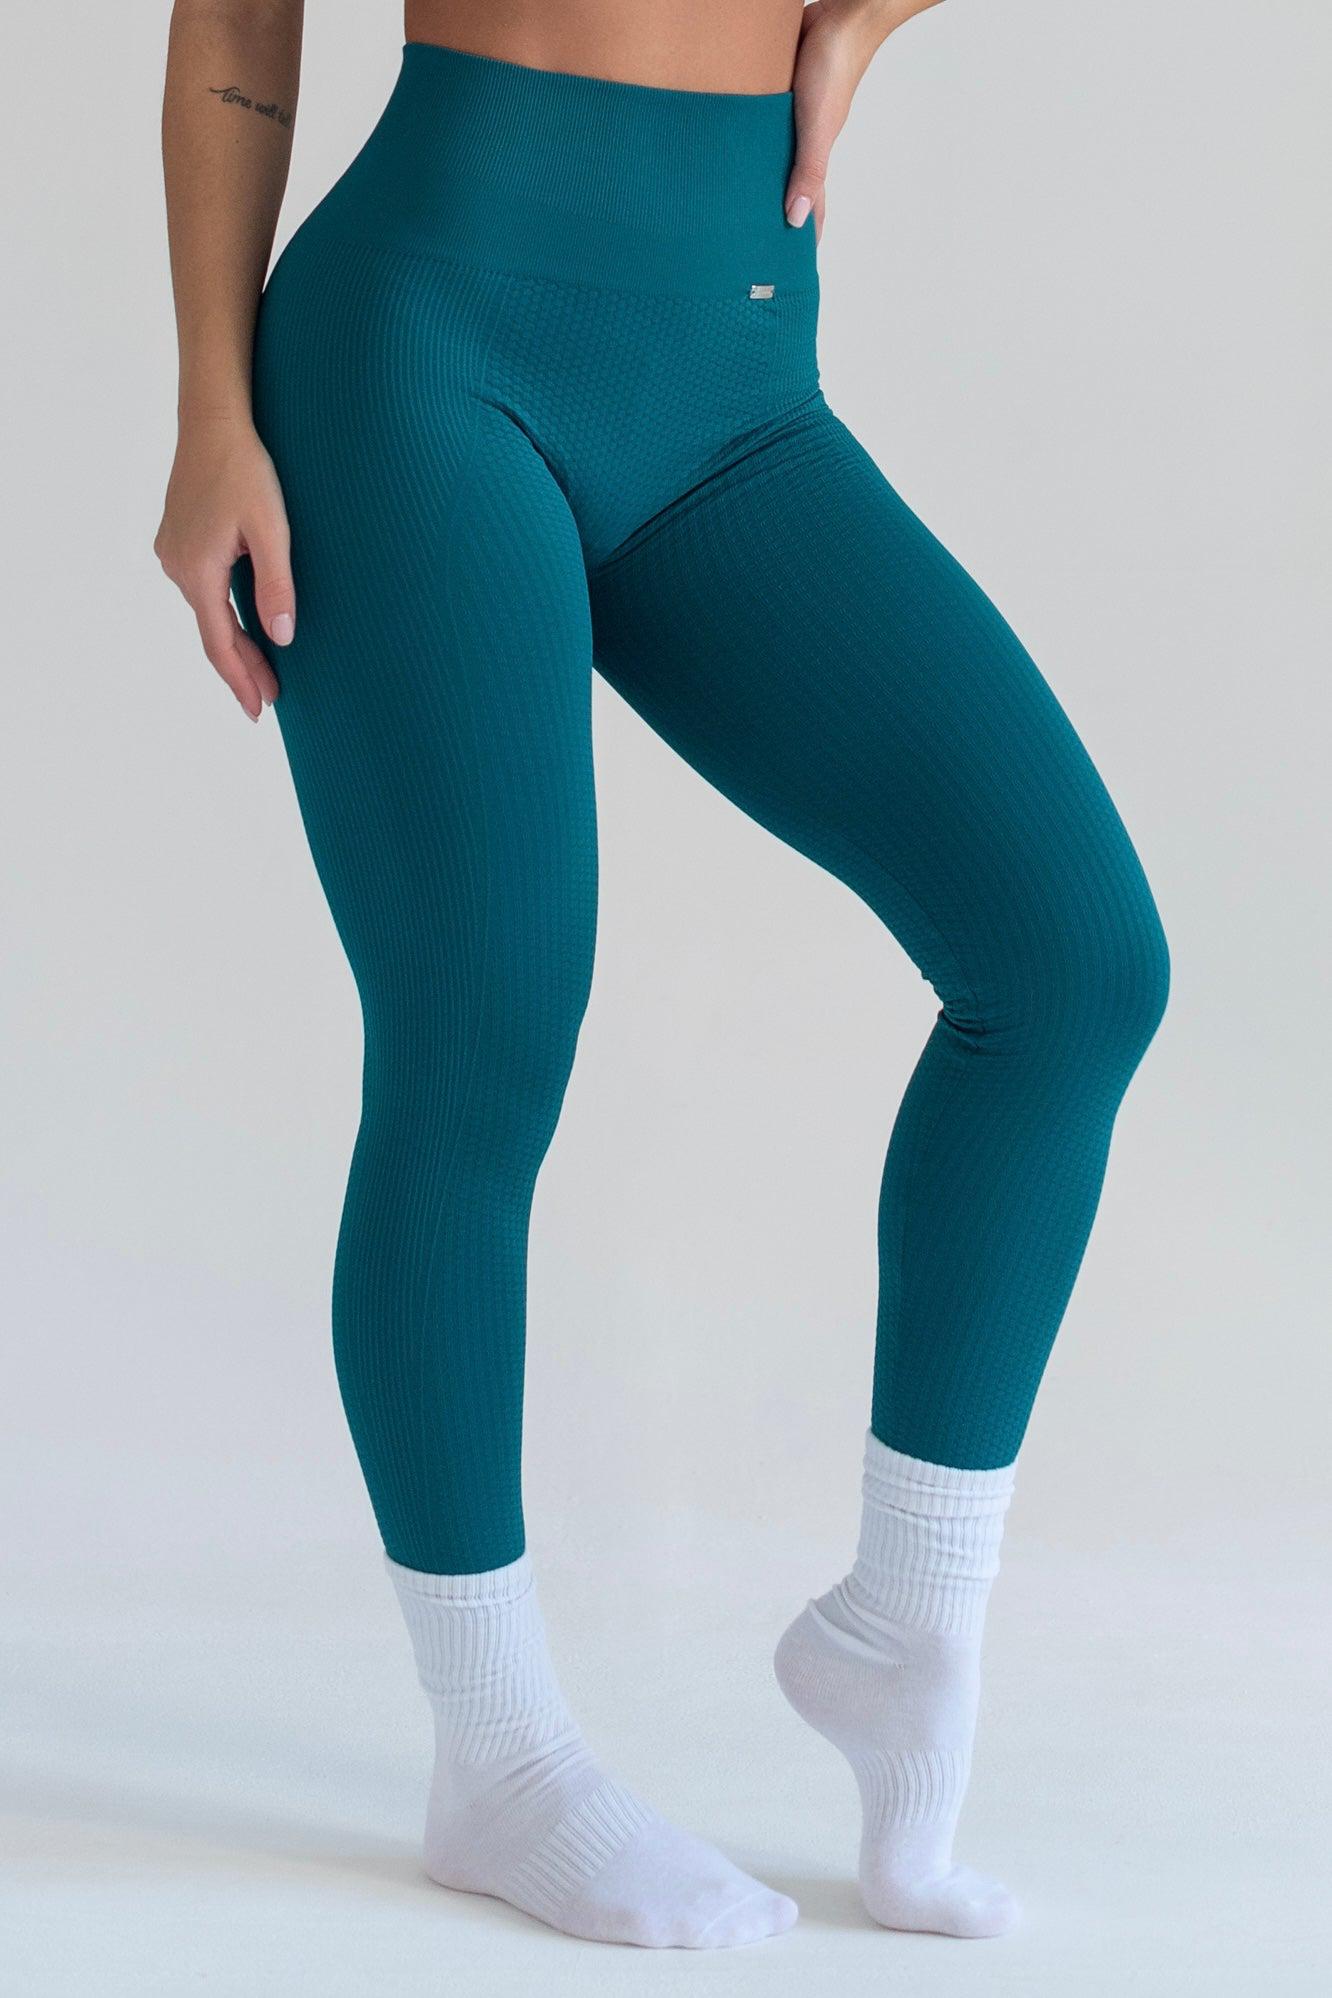 Flow Legging in Aqua Green-Long Leggings-Store Clothing Sustainable Recycled Yoga Leggings Women On-line Barcelona Believe Athletics Sustainable Recycled Yoga Clothes